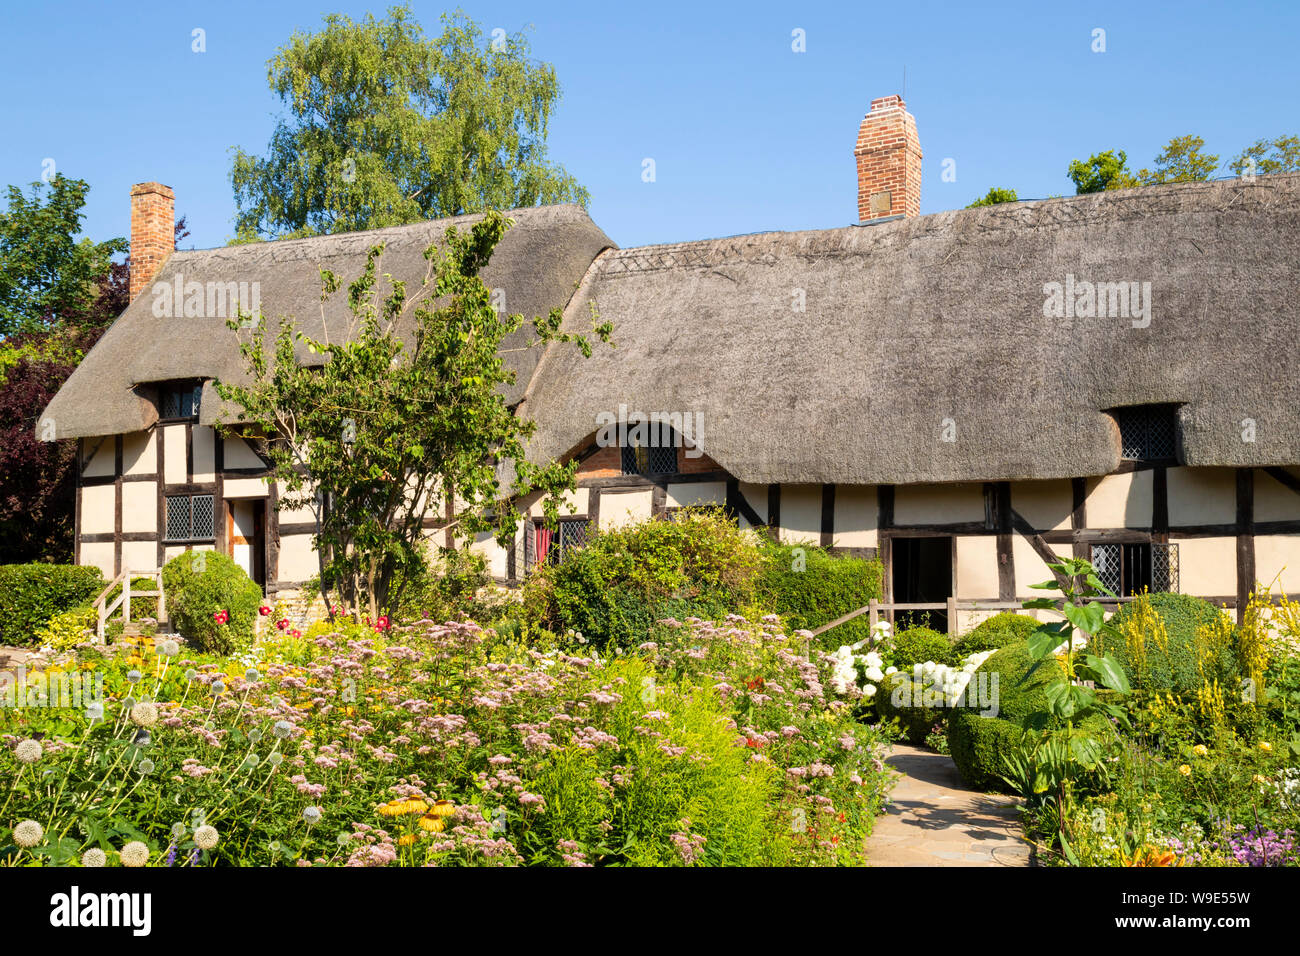 Anne Hathaway's cottage a thatched cottage in a cottage garden Shottery near Stratford upon Avon Warwickshire England UK GB Europe Stock Photo